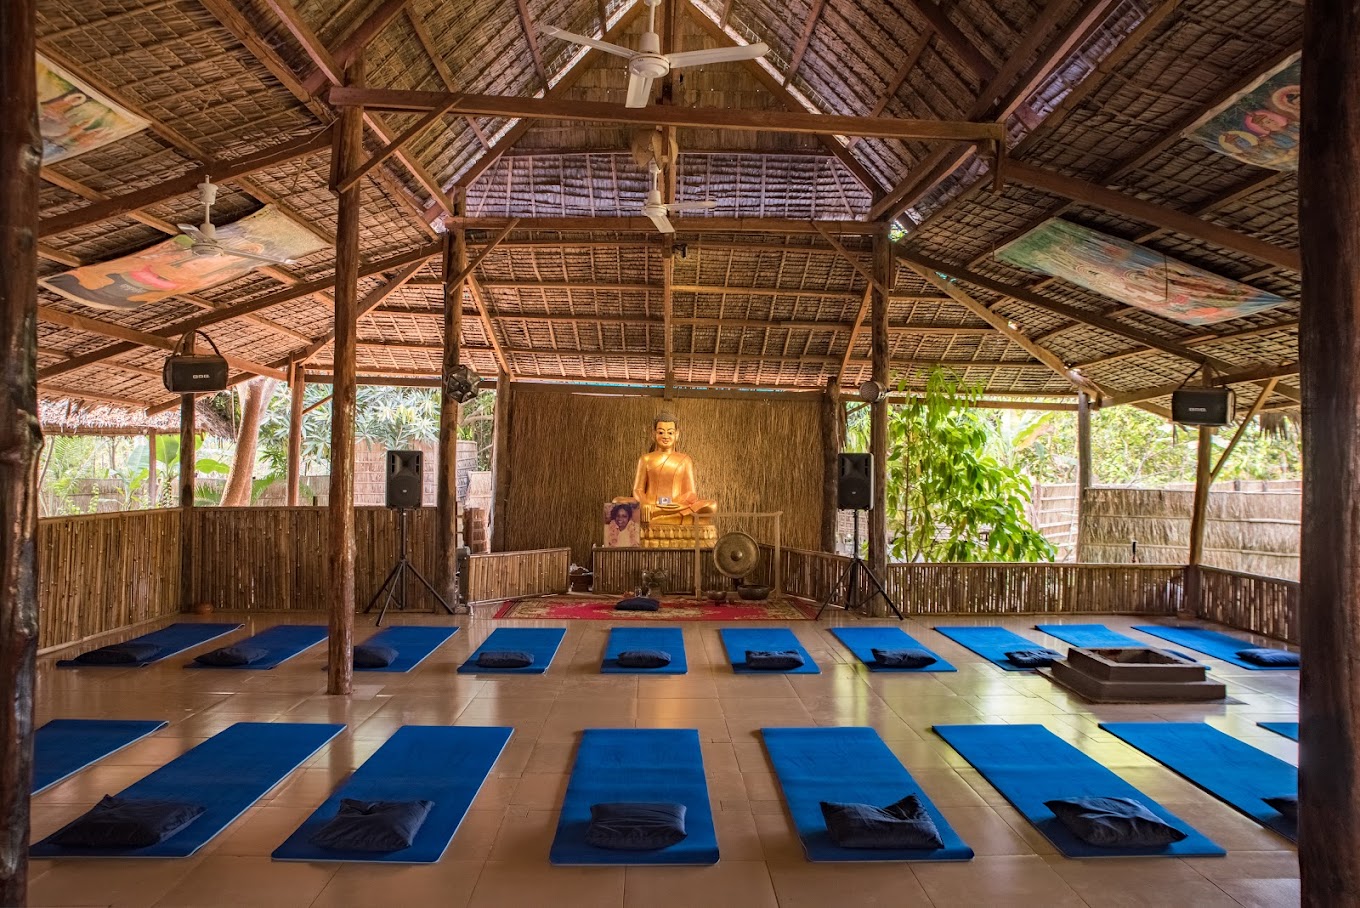 Yoga Retreats in Cambodia: Top 10 Best Yoga Retreats For Any Level In 2023